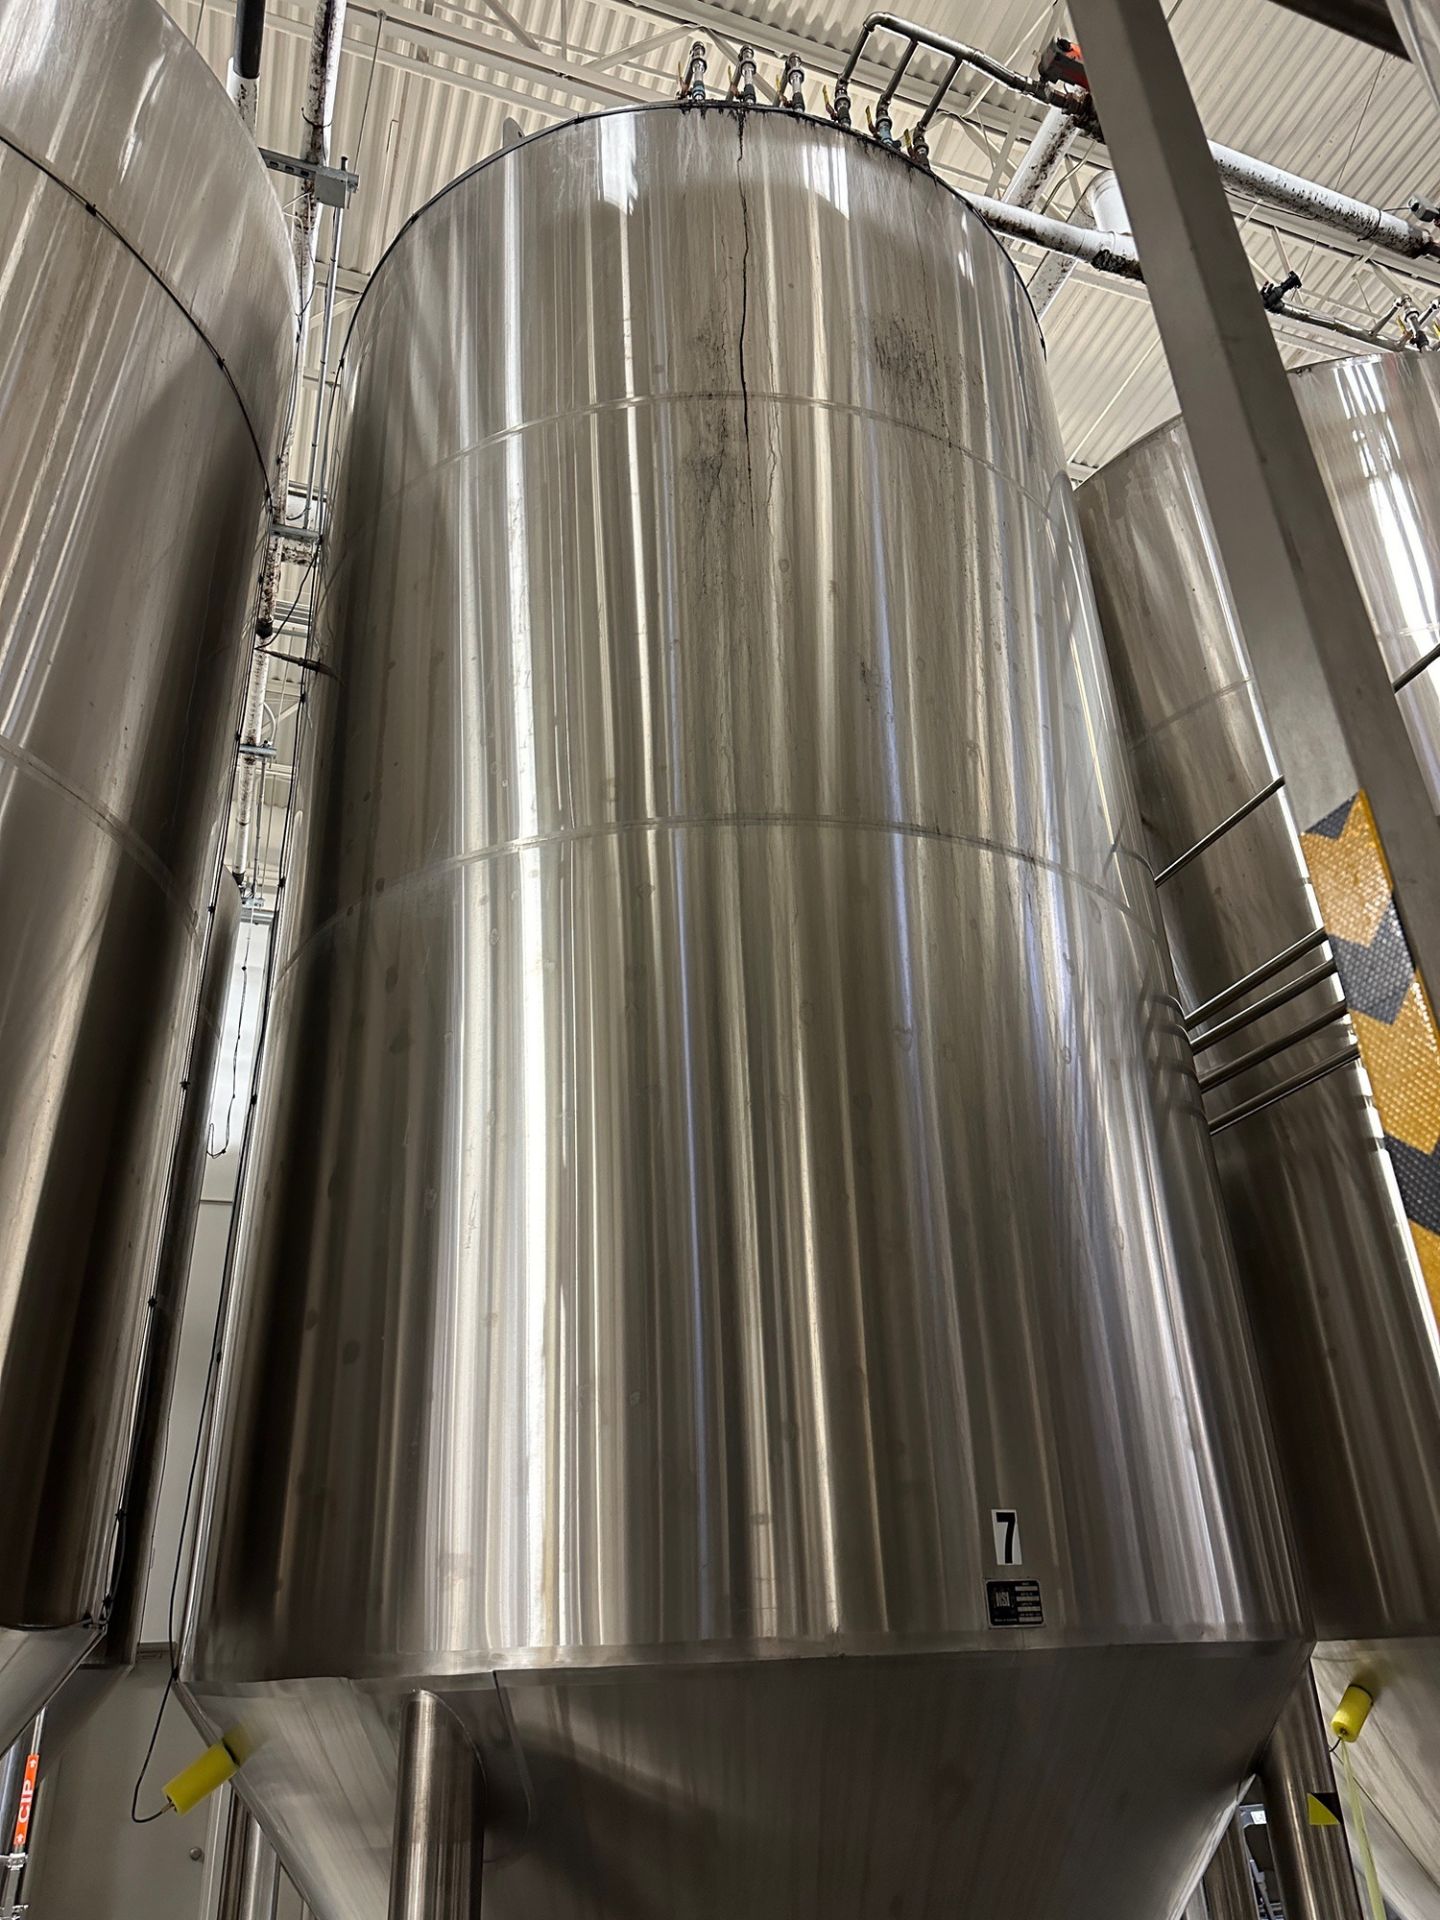 (1 of 6) 2016 NSI 132 BBL FV / 175 BBL or 5,400 Gal Max Capacity Stainless Steel Uni-Tank (7), Cone - Image 3 of 4